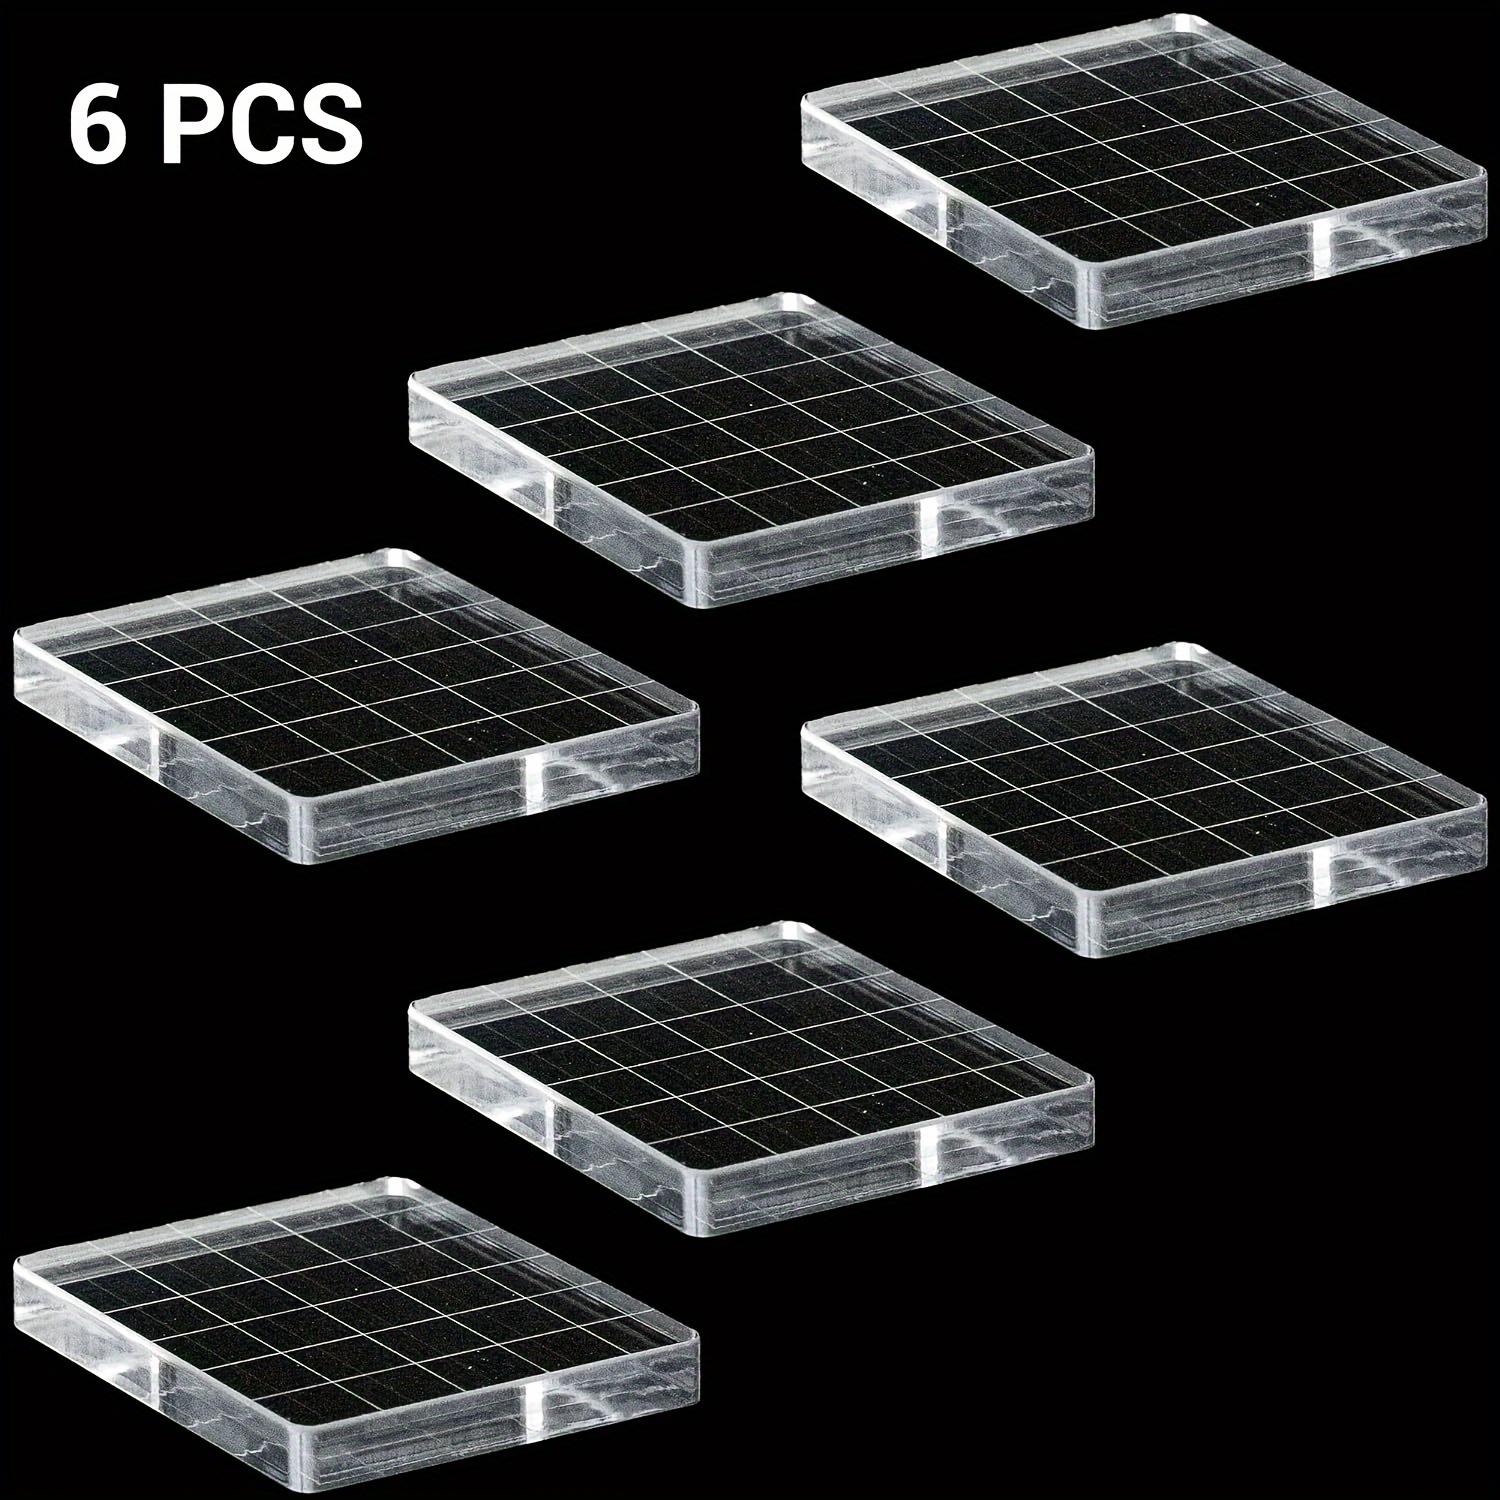 6pcs Stamp Blocks Clear Acrylic Stamping Blocks Tool Set With Grid Line For  DIY Crafts Scrapbooking Card Making Decorations Stamping Projects